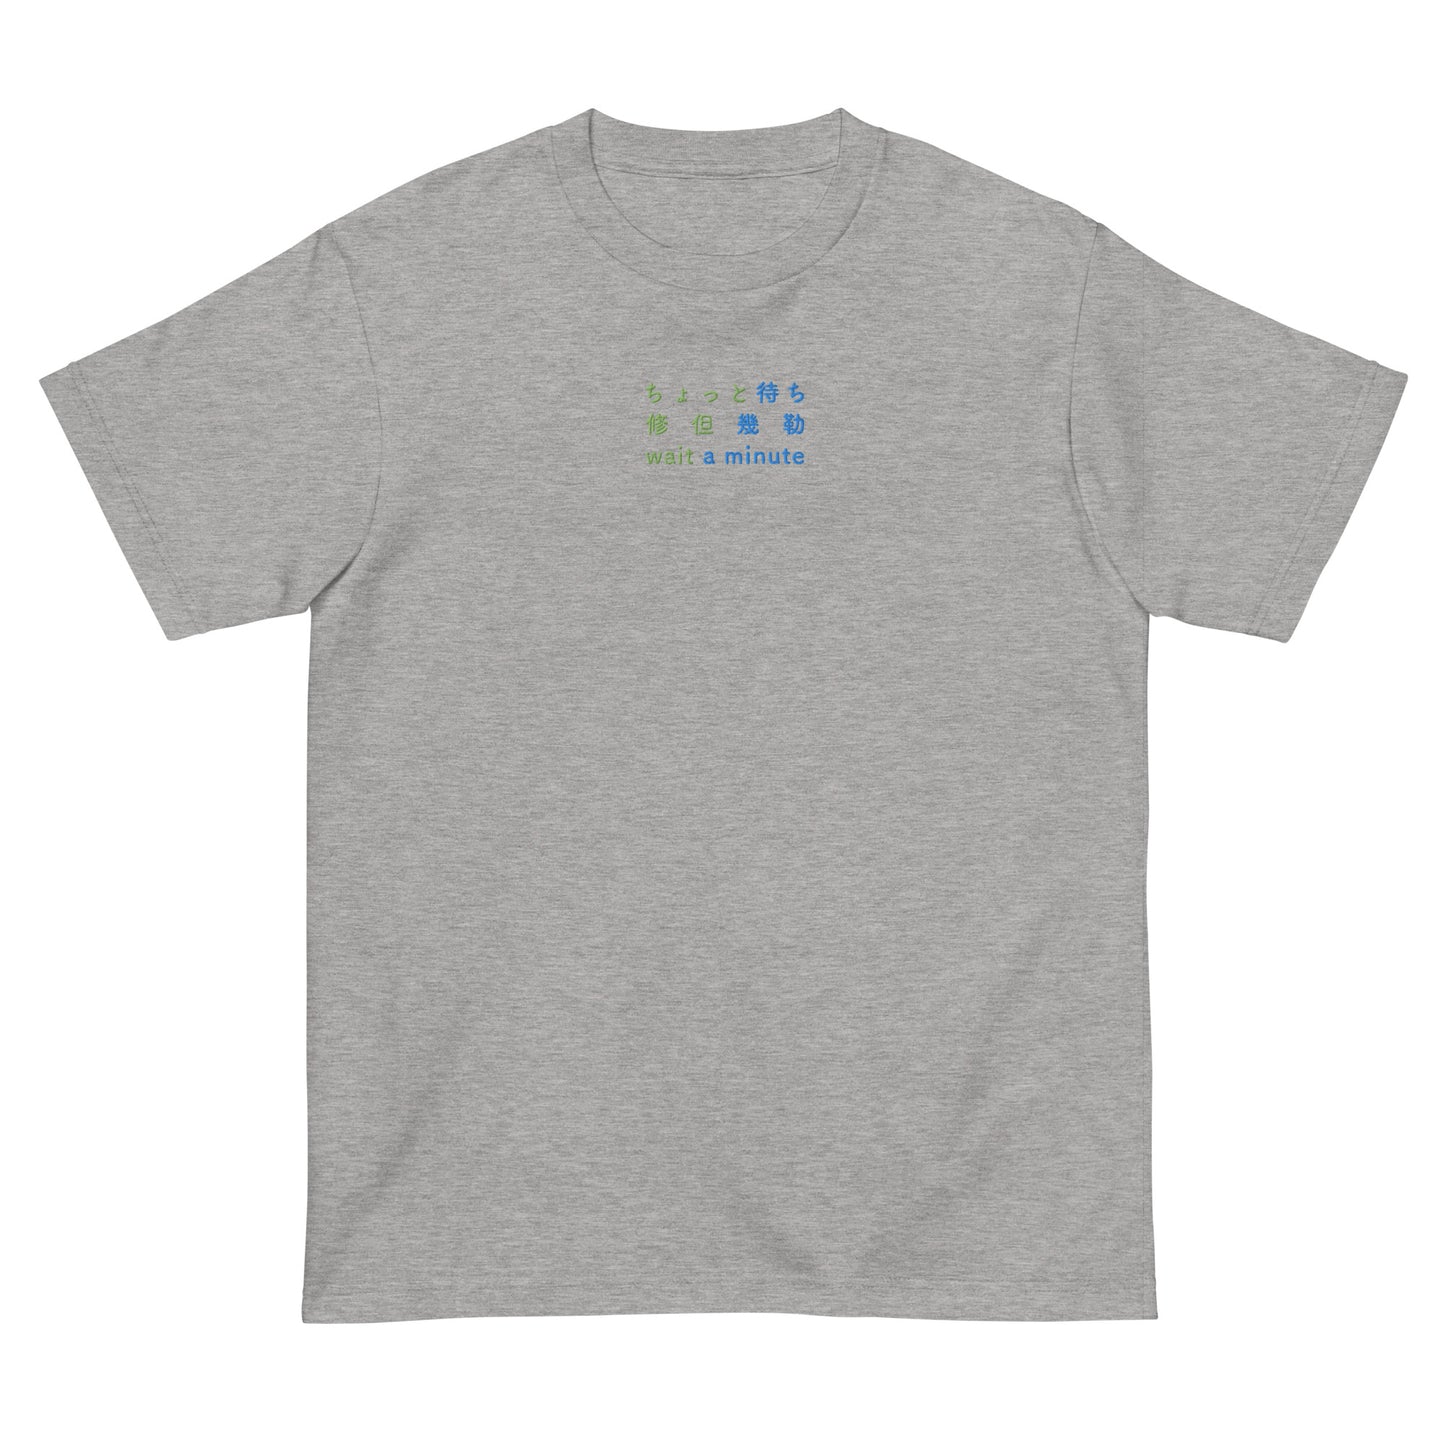 Light Gray High Quality Tee - Front Design with an Green, Blue Embroidery "Wait A Minute" in Japanese,Chinese and English Edit alt text